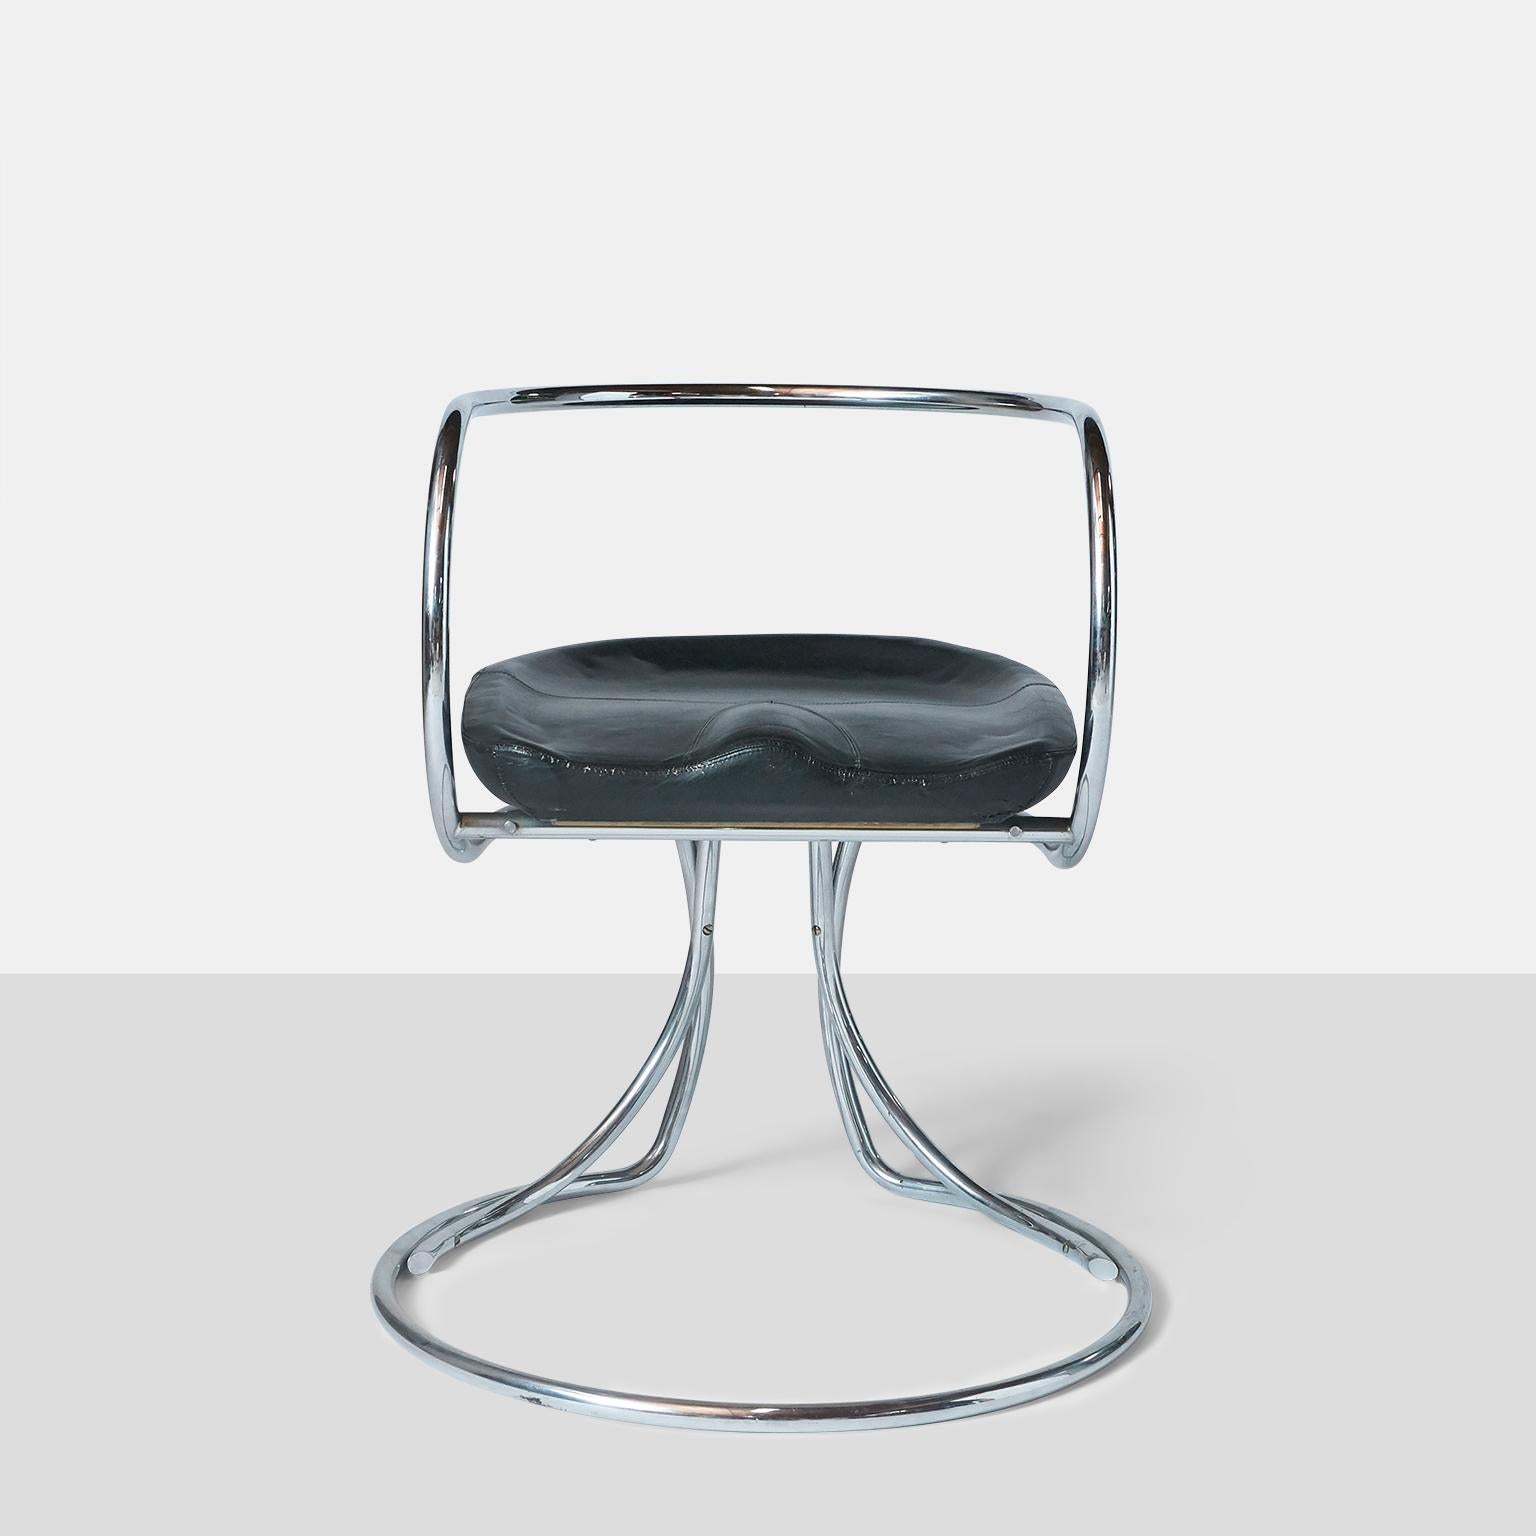 Vladimir Tatlin chair
A very rare dining armchair in chromed tubular steel with molded foam seat and covered in original black leather. Designed in 1927 by Vladimir Tatlin. 
Made in Italy, circa 1950s.